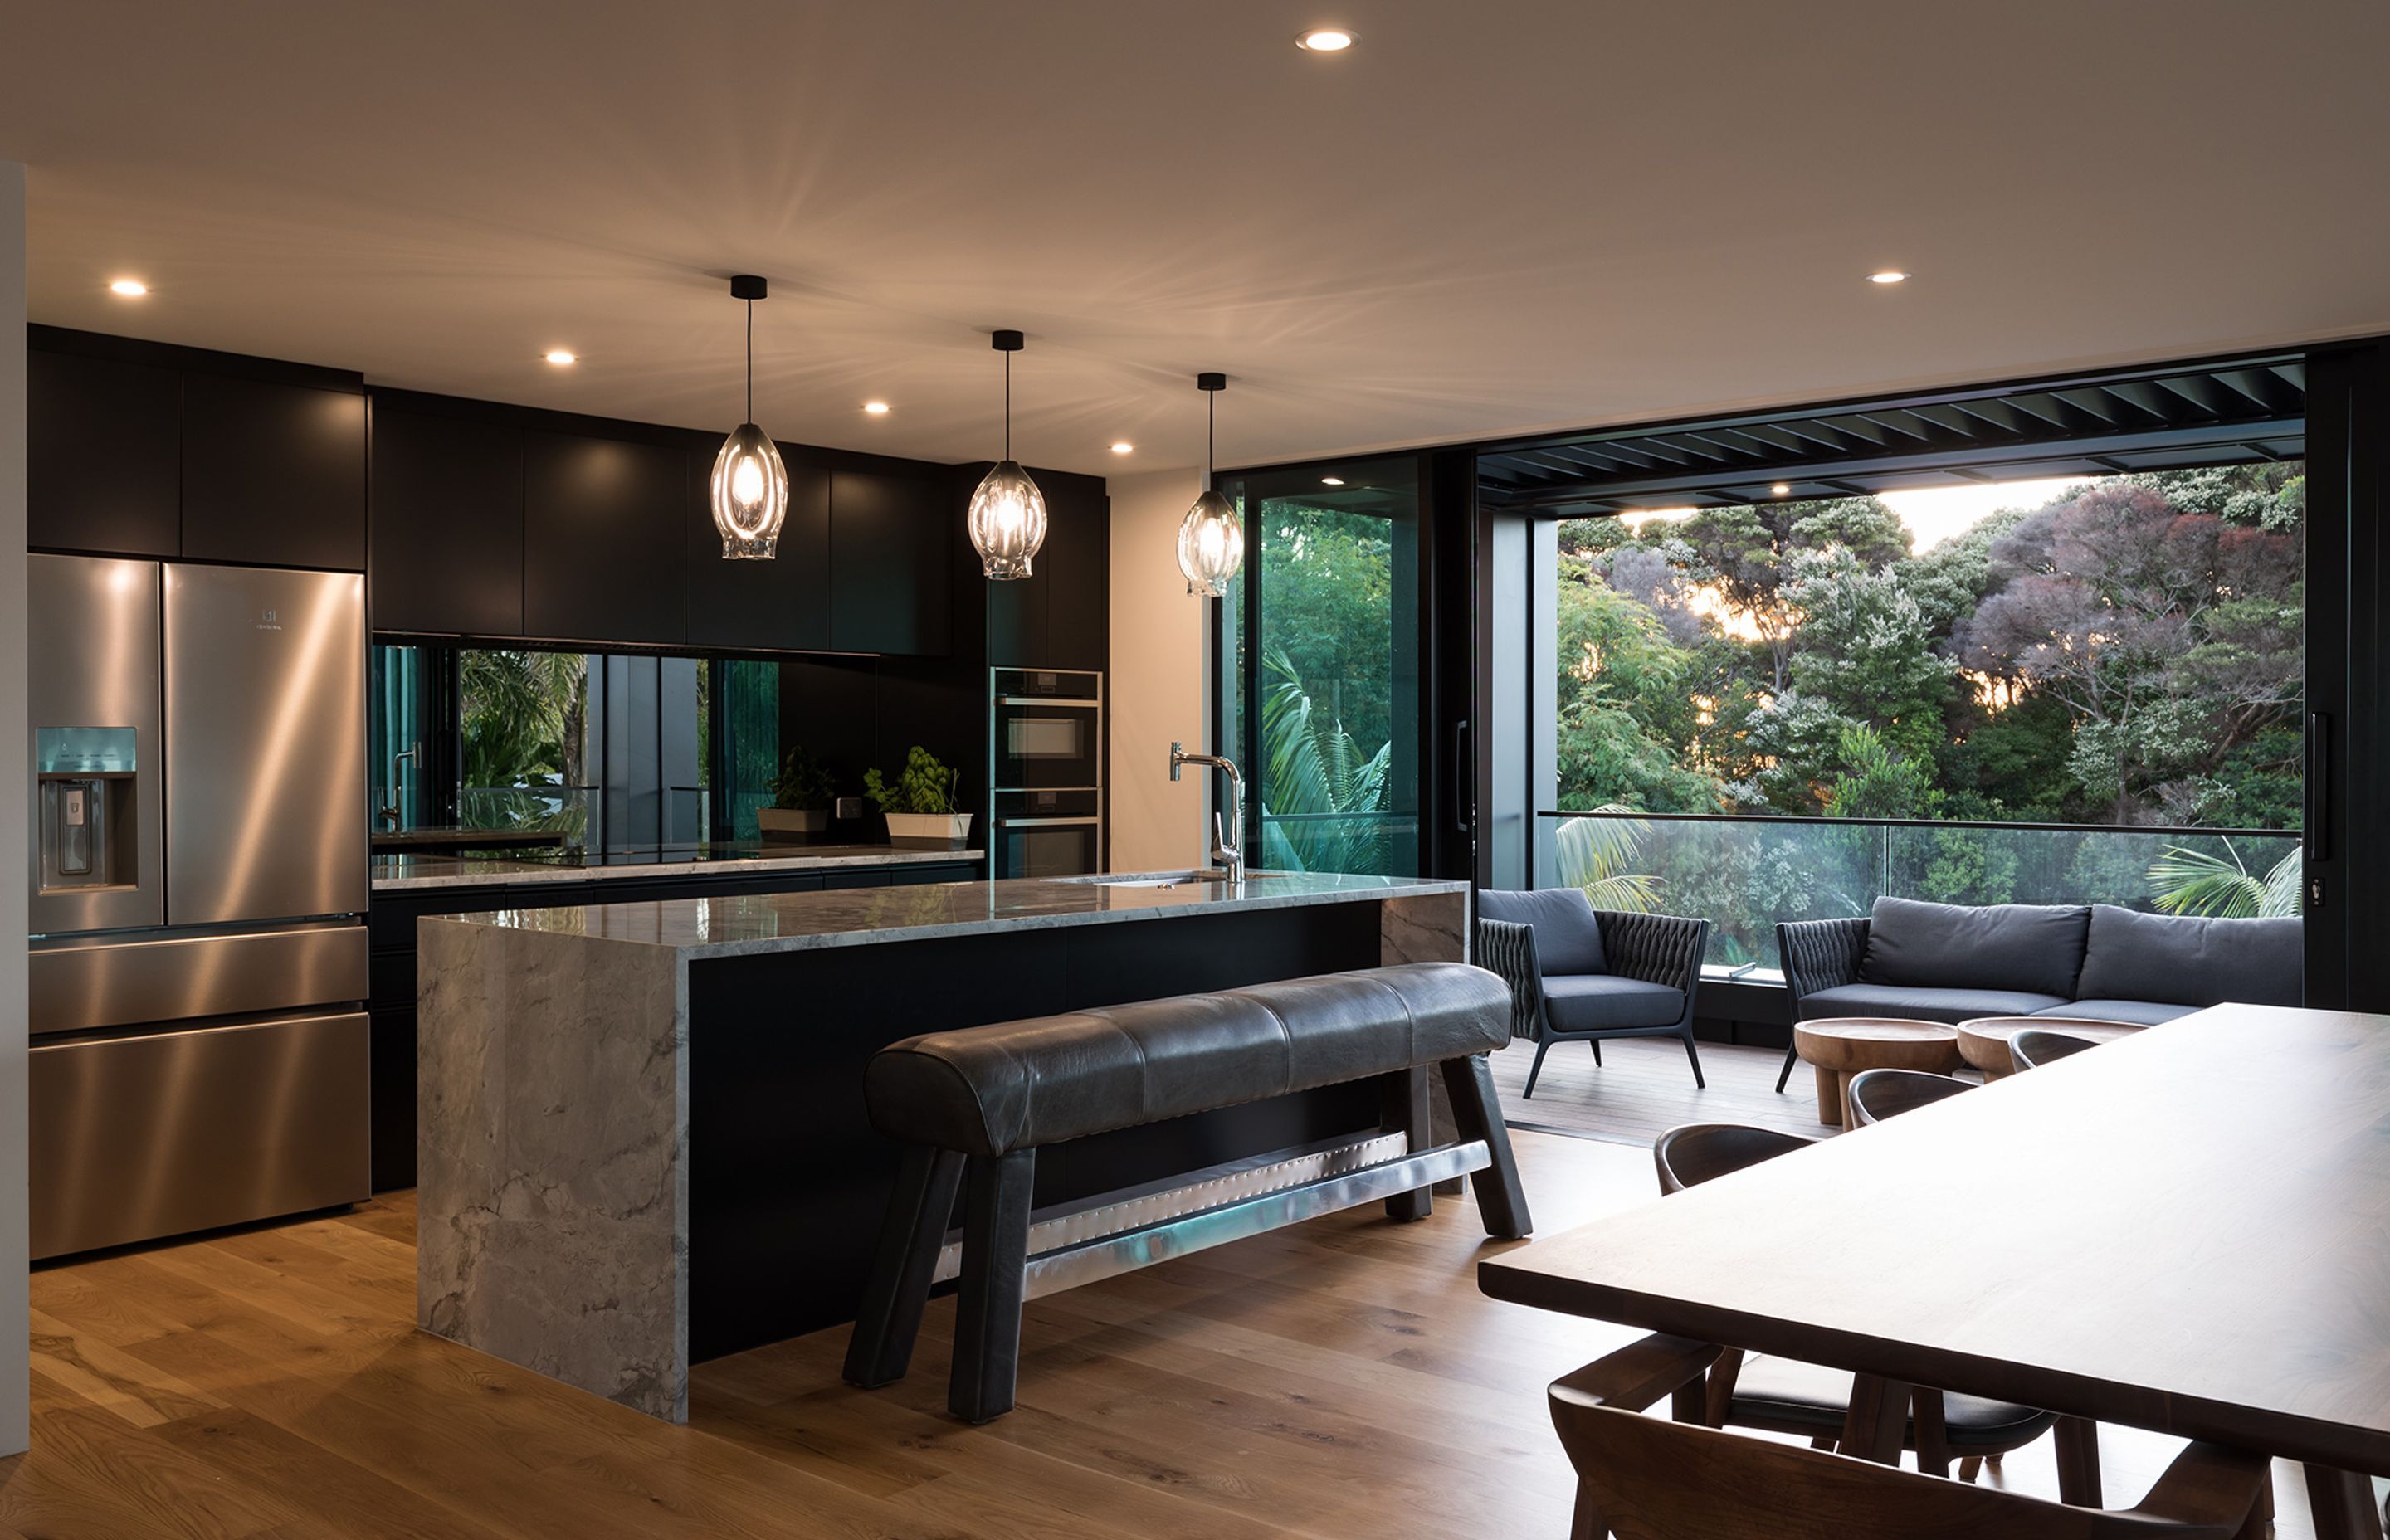 A cantilevered element was added to the front of the home to provide for a much larger outdoor area, which helps take advantage of the leafy outlook and brings a sense of nature indoors—enhanced by the stone benchtops and mirrored splashback.